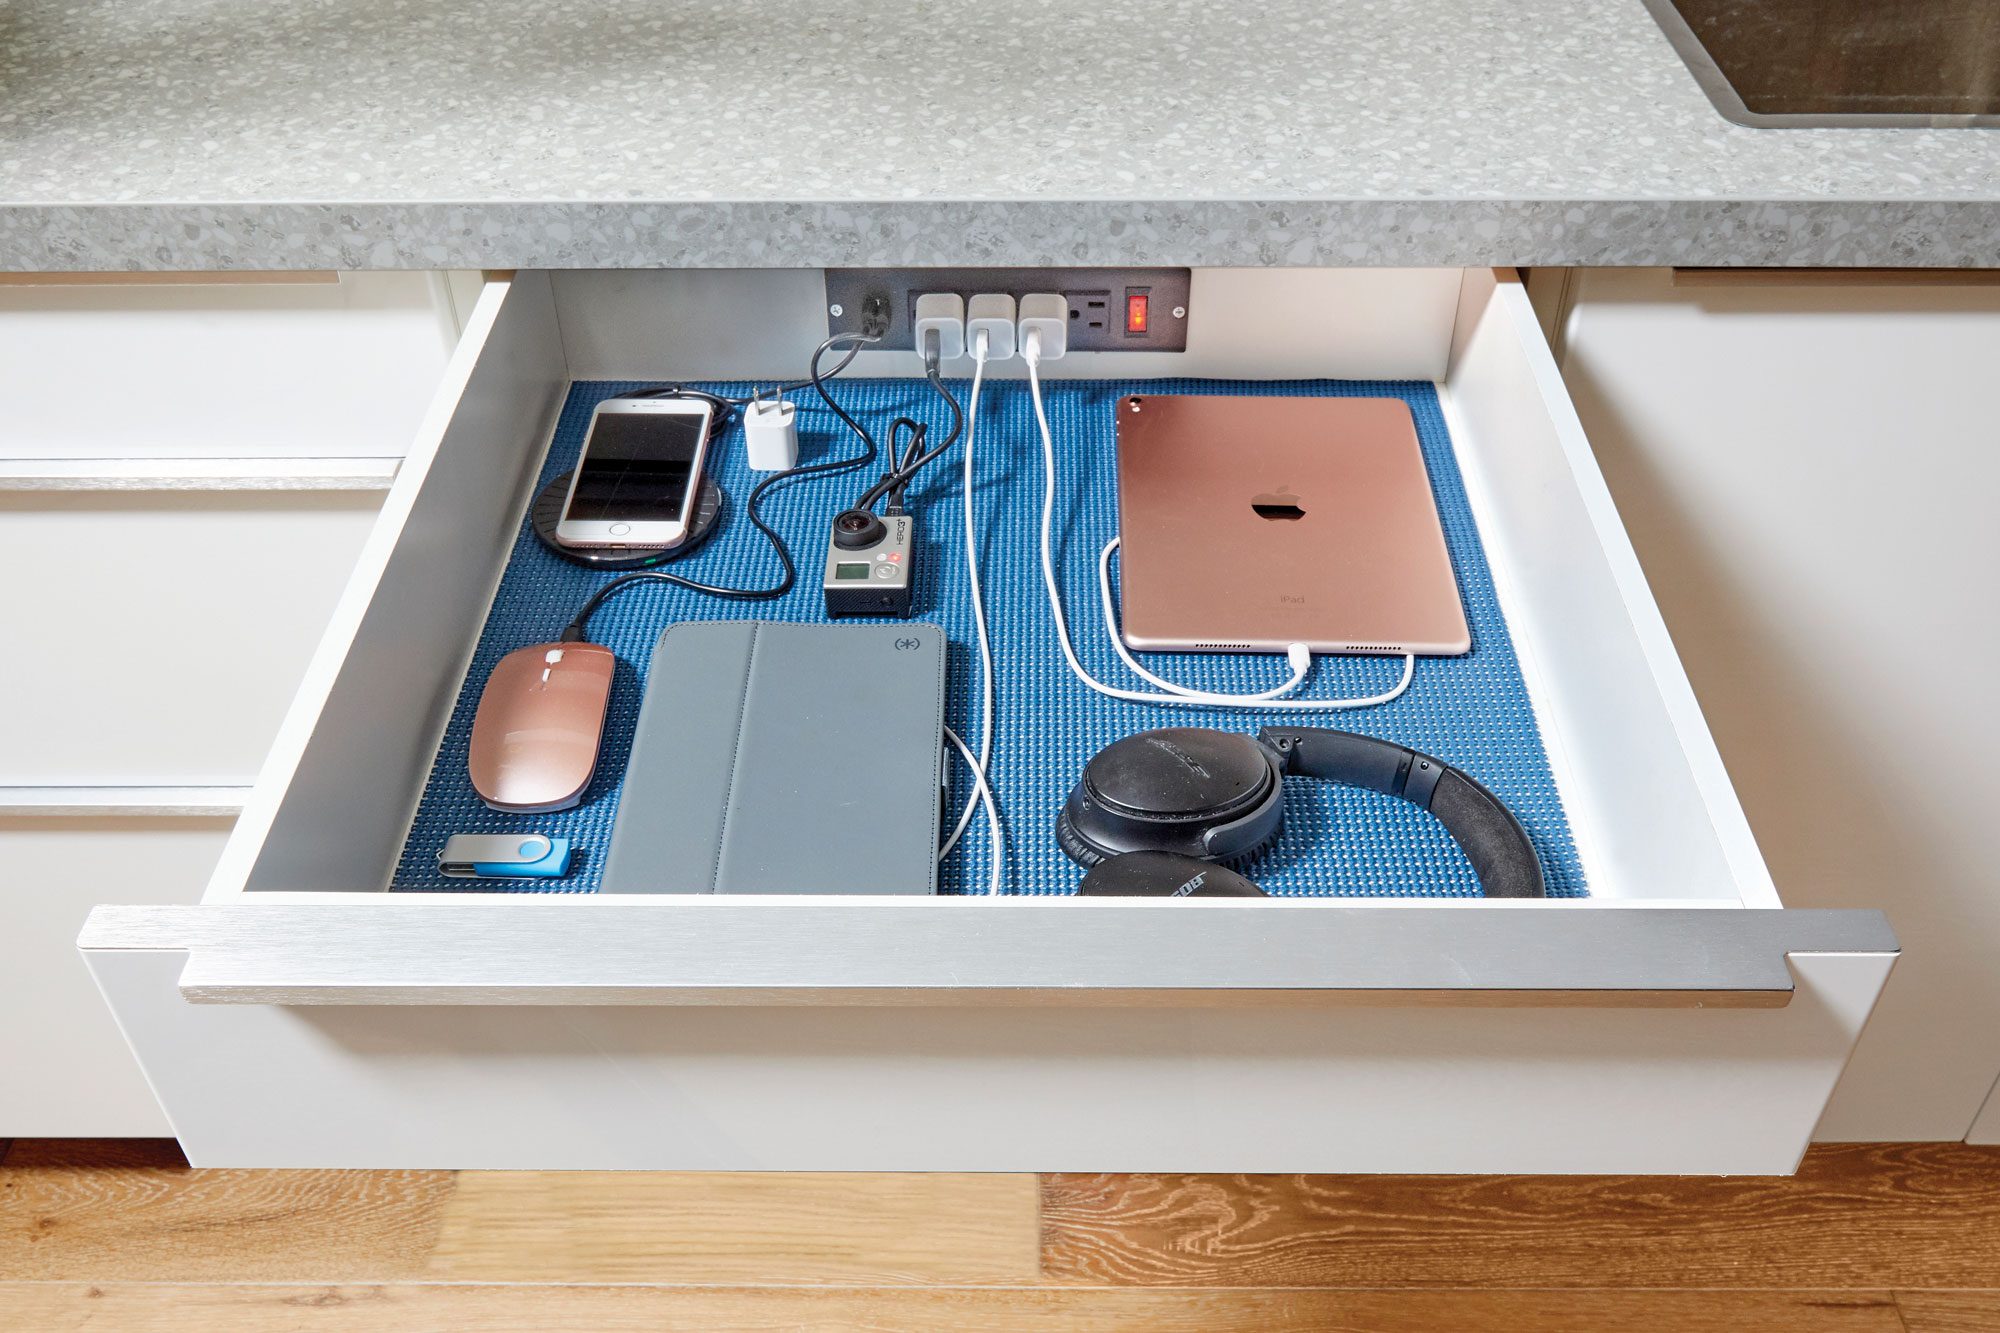 outlet built into a kitchen drawer to manage cords plugged in devices